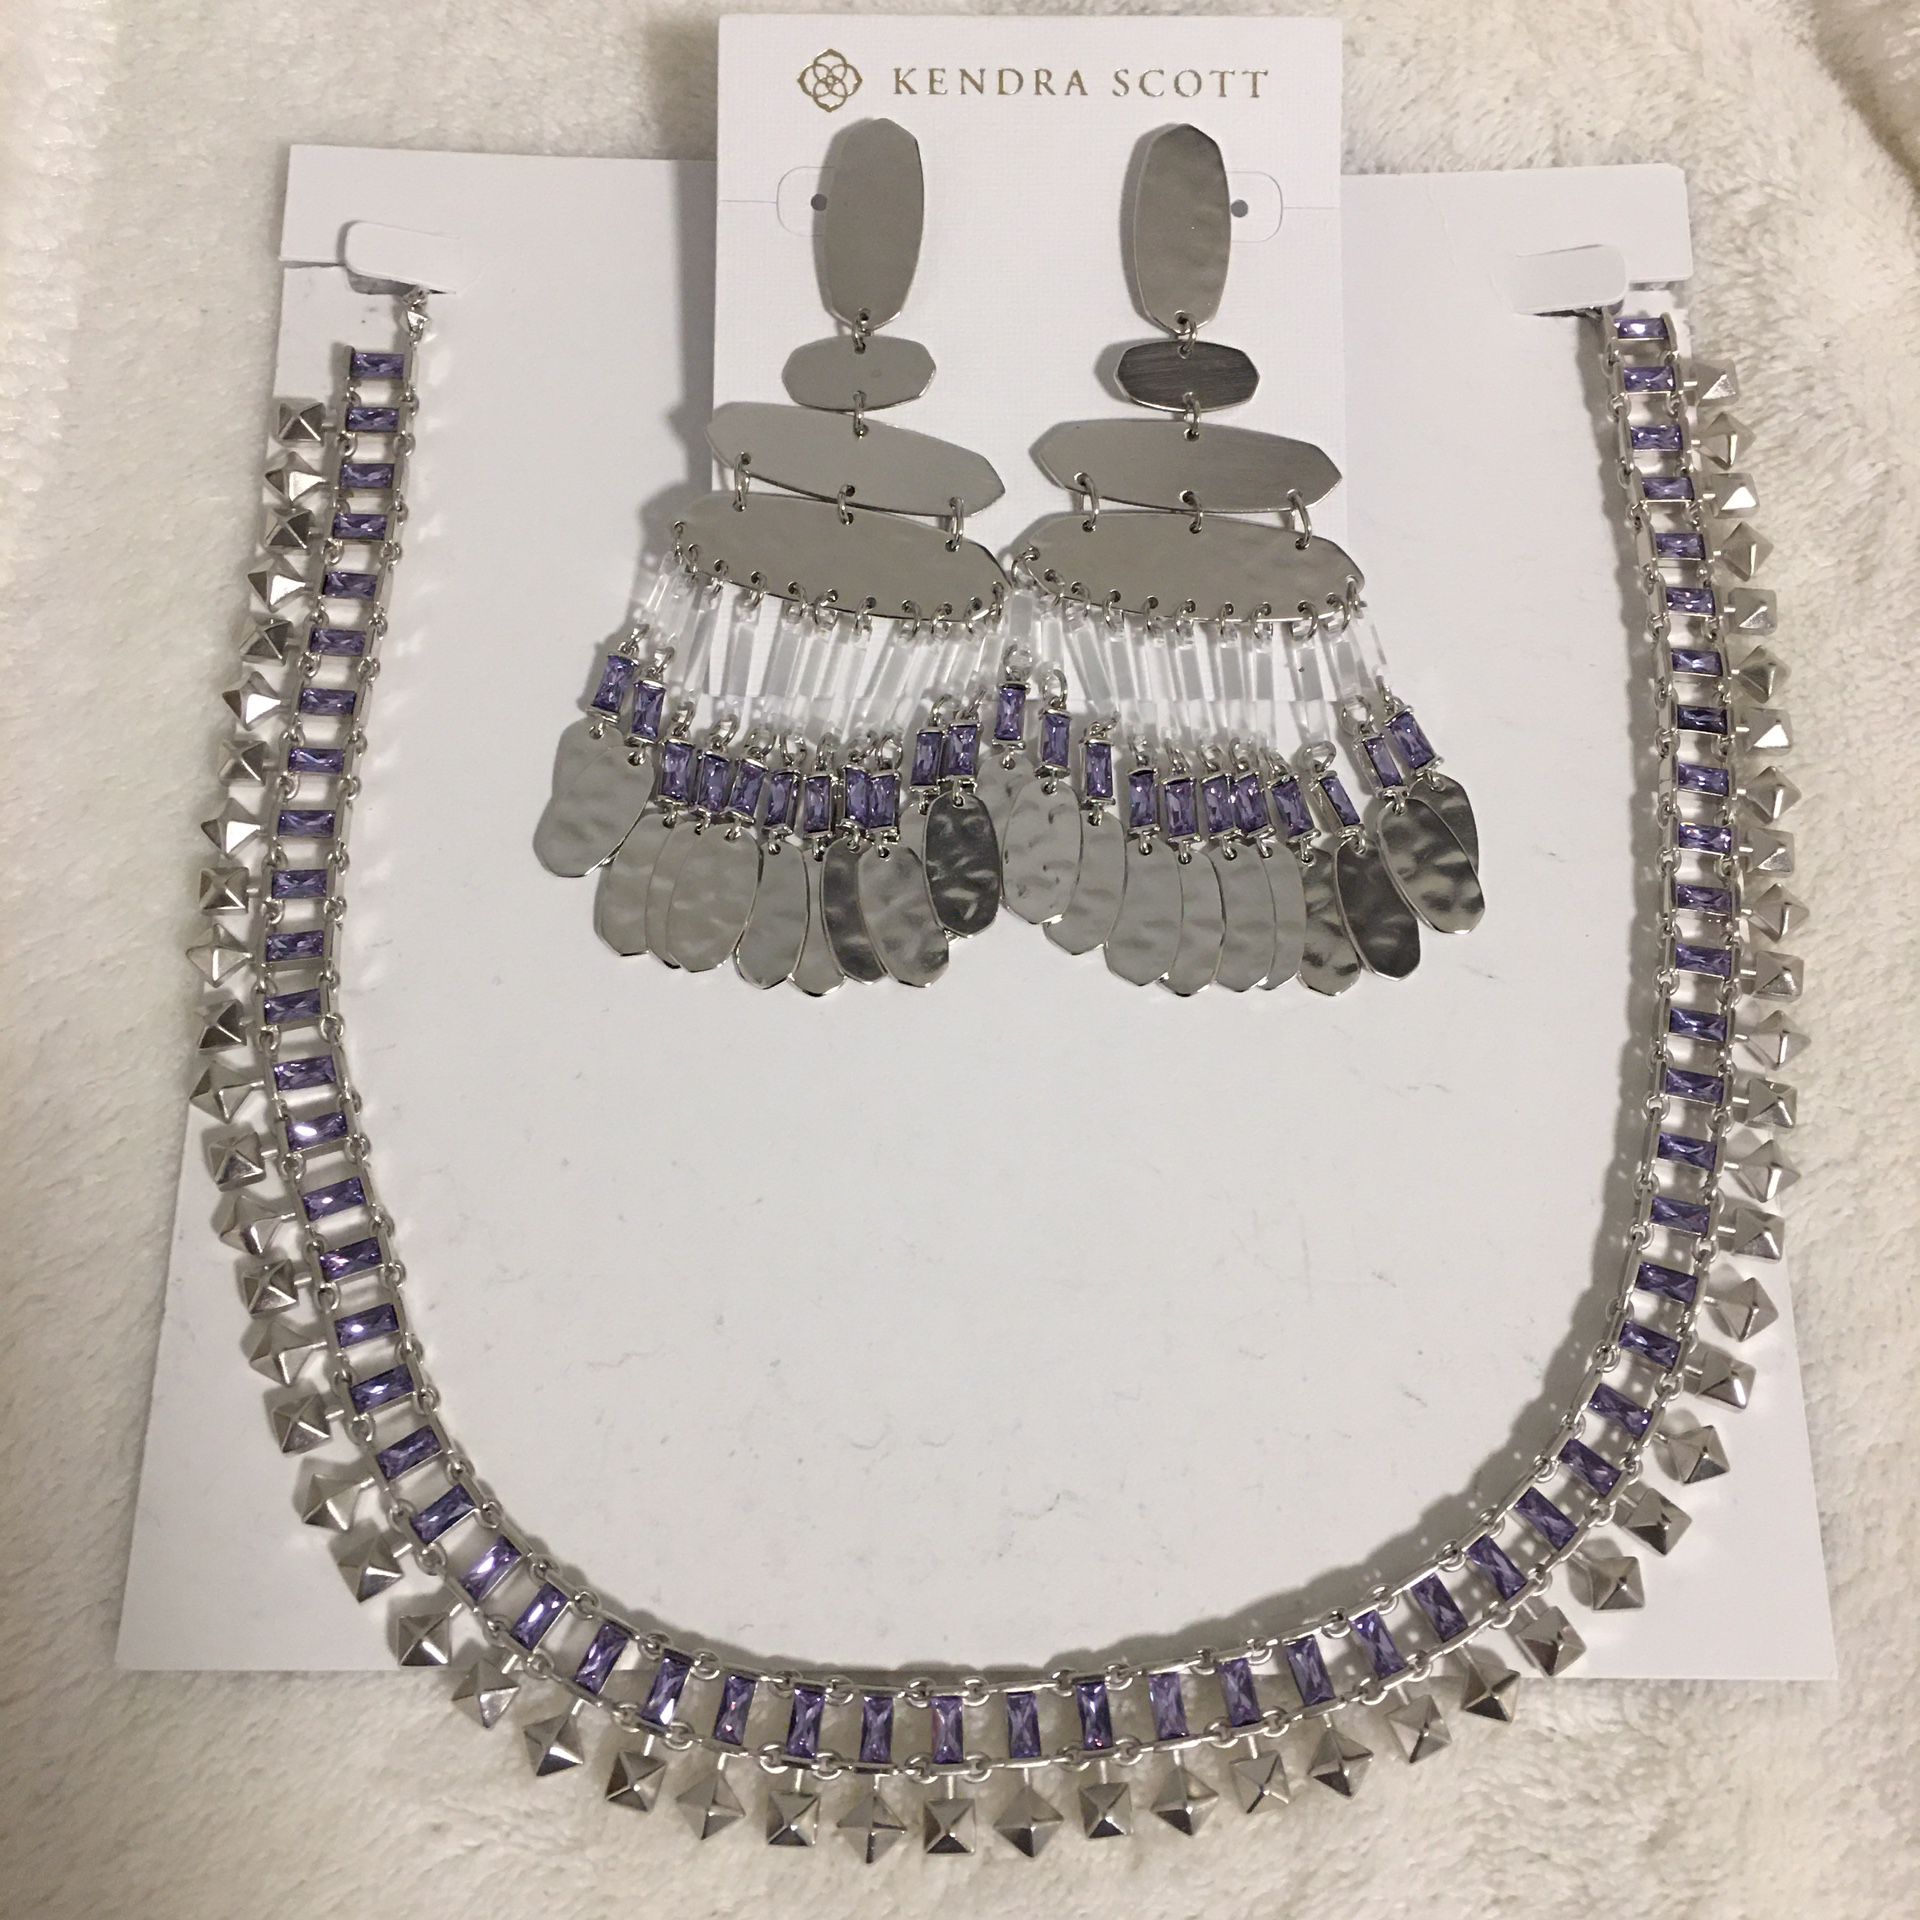 Kendra Scott necklace and earring set